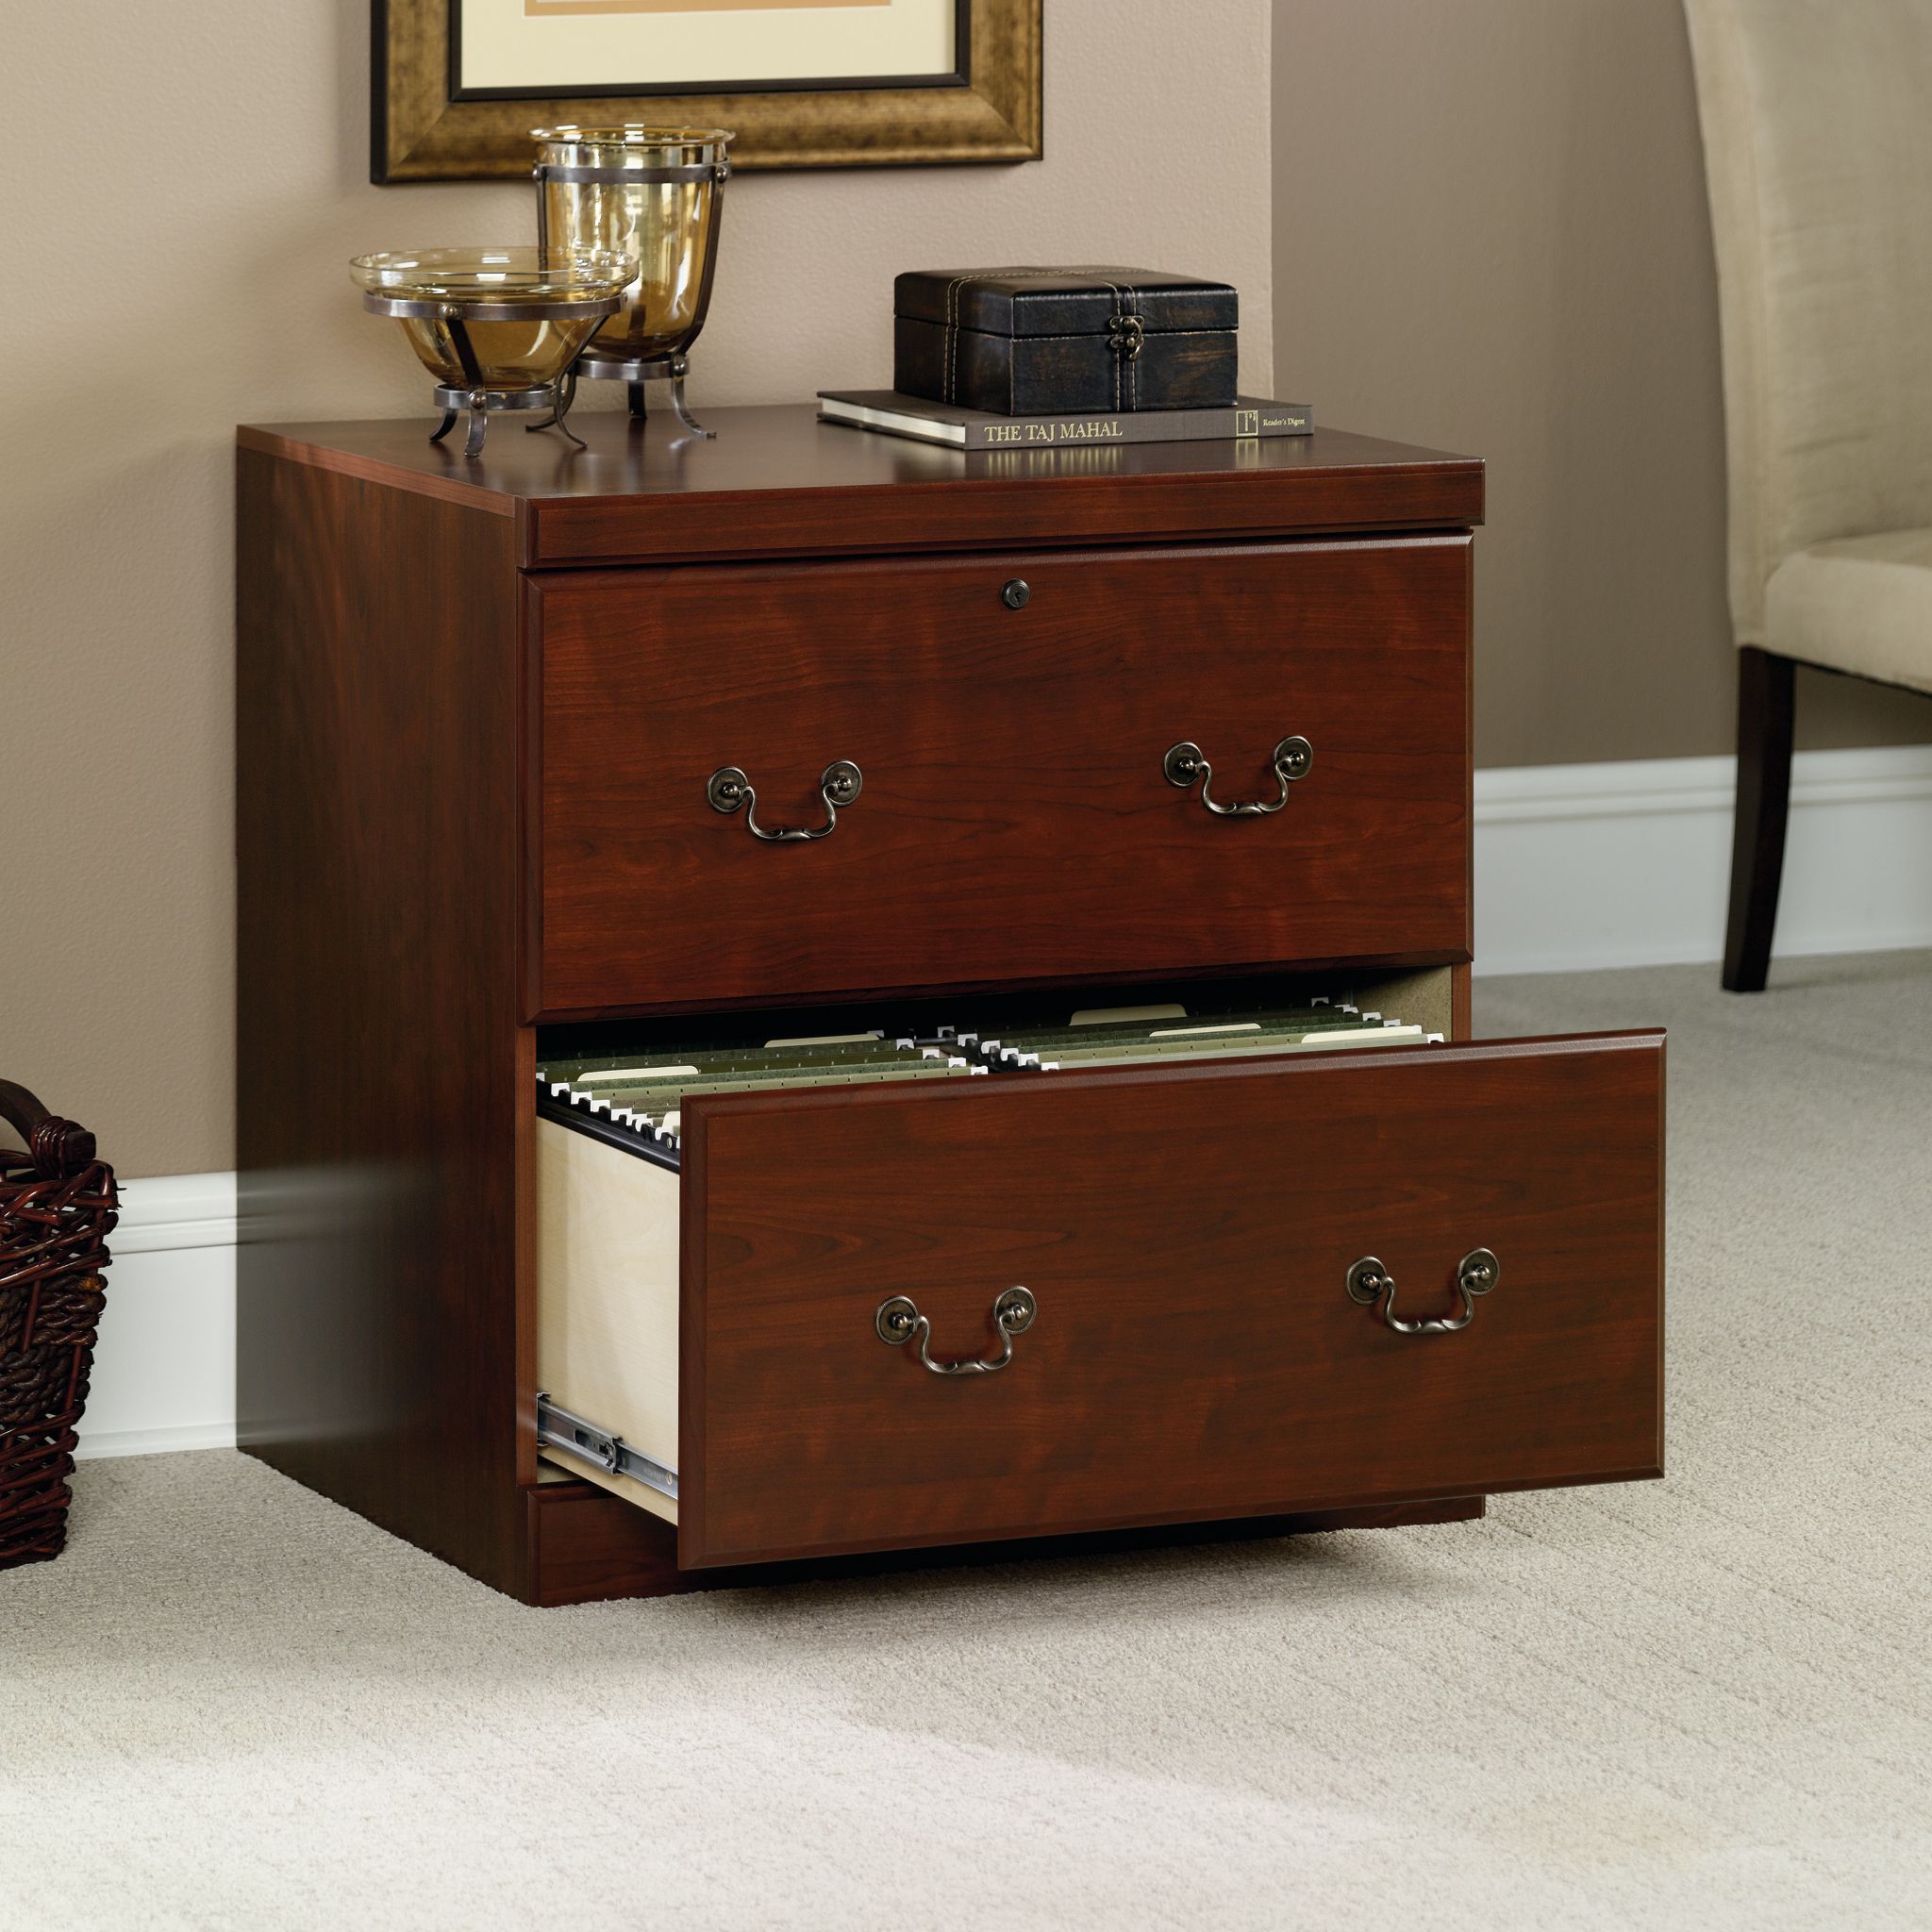 Sauder Heritage Hill Lateral File Cabinet, Classic Cherry Finish - image 3 of 5